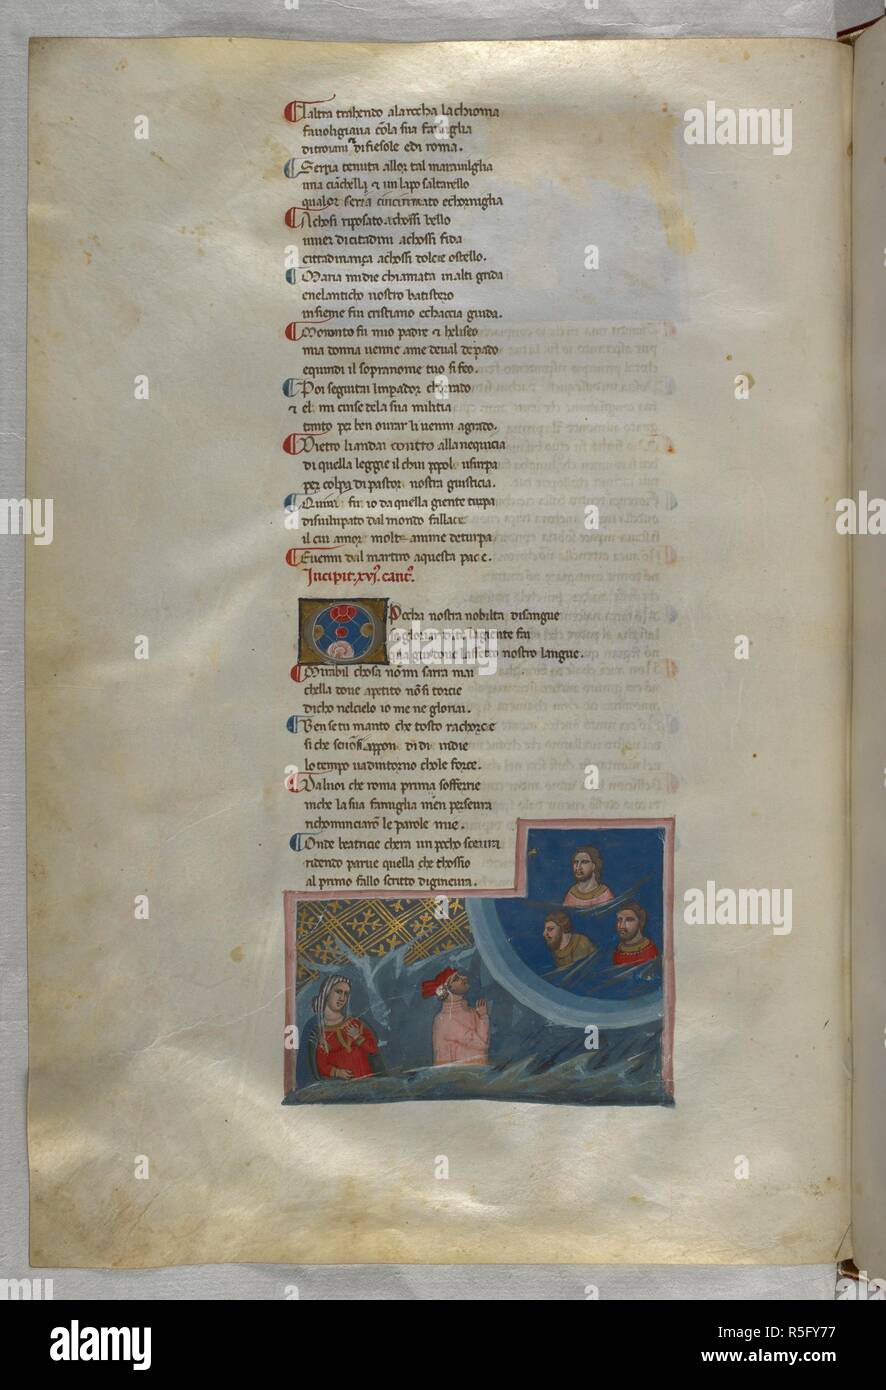 Paradiso : Dante talks to Cacciaguida, who is with two other male souls. Dante Alighieri, Divina Commedia ( The Divine Comedy ), with a commentary in Latin. 1st half of the 14th century. Source: Egerton 943, f.154v. Language: Italian, Latin. Stock Photo